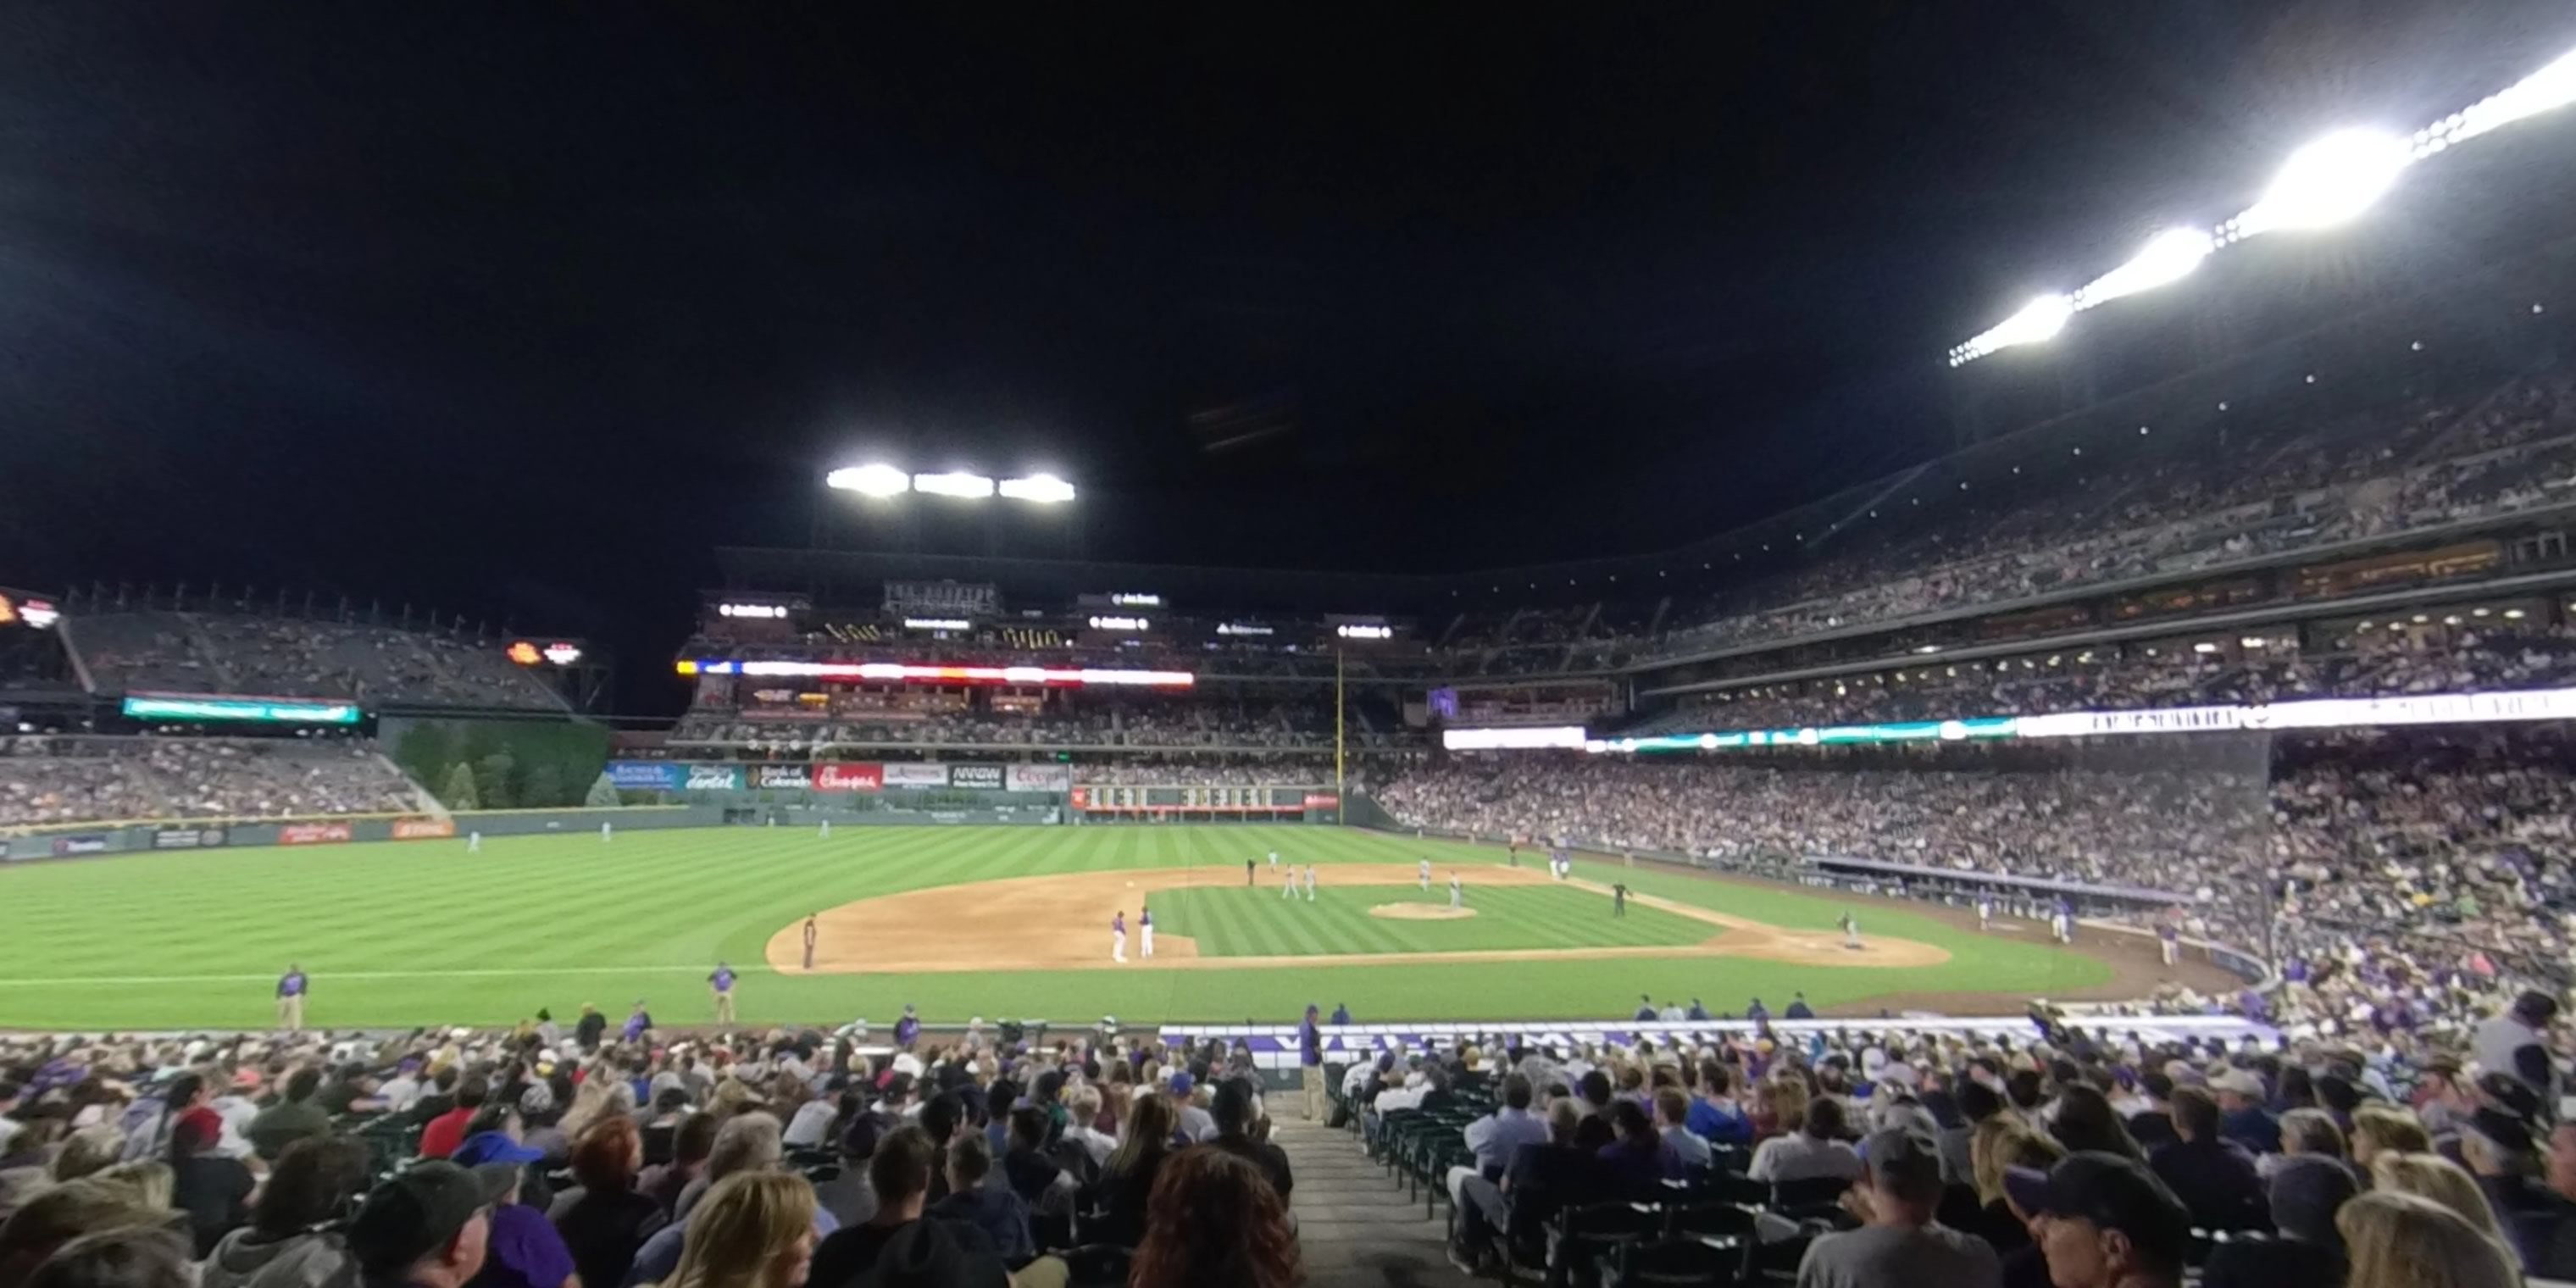 section 138 panoramic seat view  - coors field